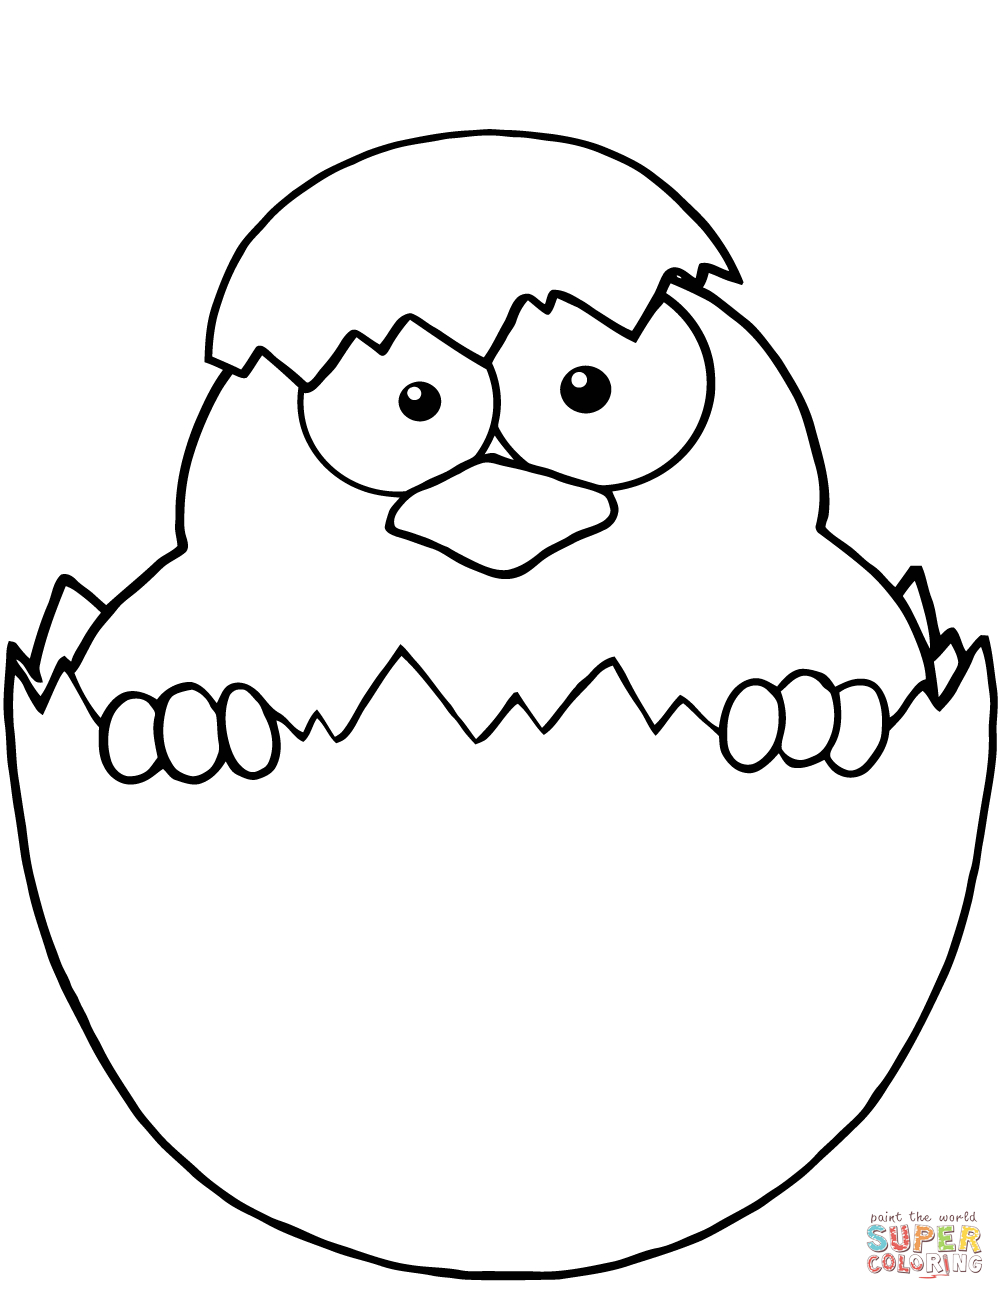 Baby Chicks Coloring Pages | Free Printable Pictures - Free Printable Easter Baby Chick Coloring Pages